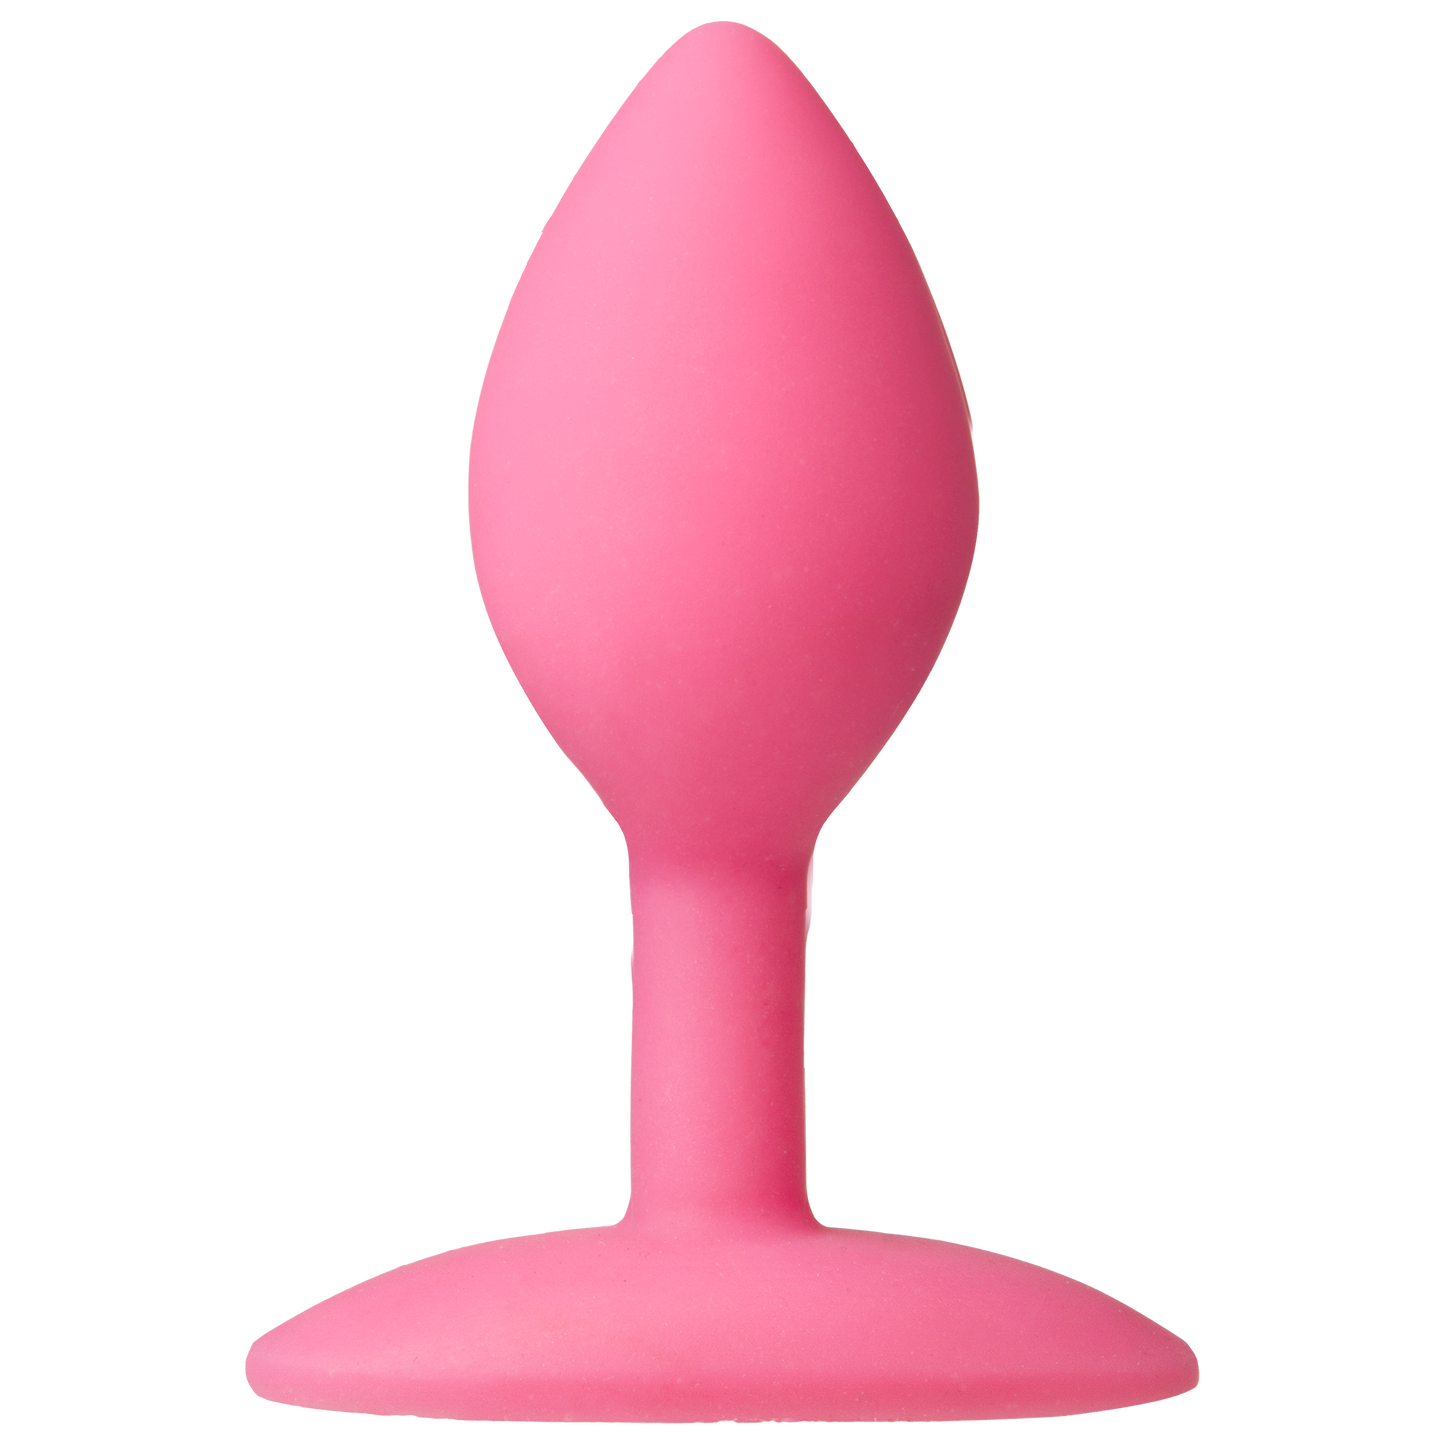 Platinum Premium Silicone The Mini's Spade - Small, Pink - Thorn & Feather Sex Toy Canada